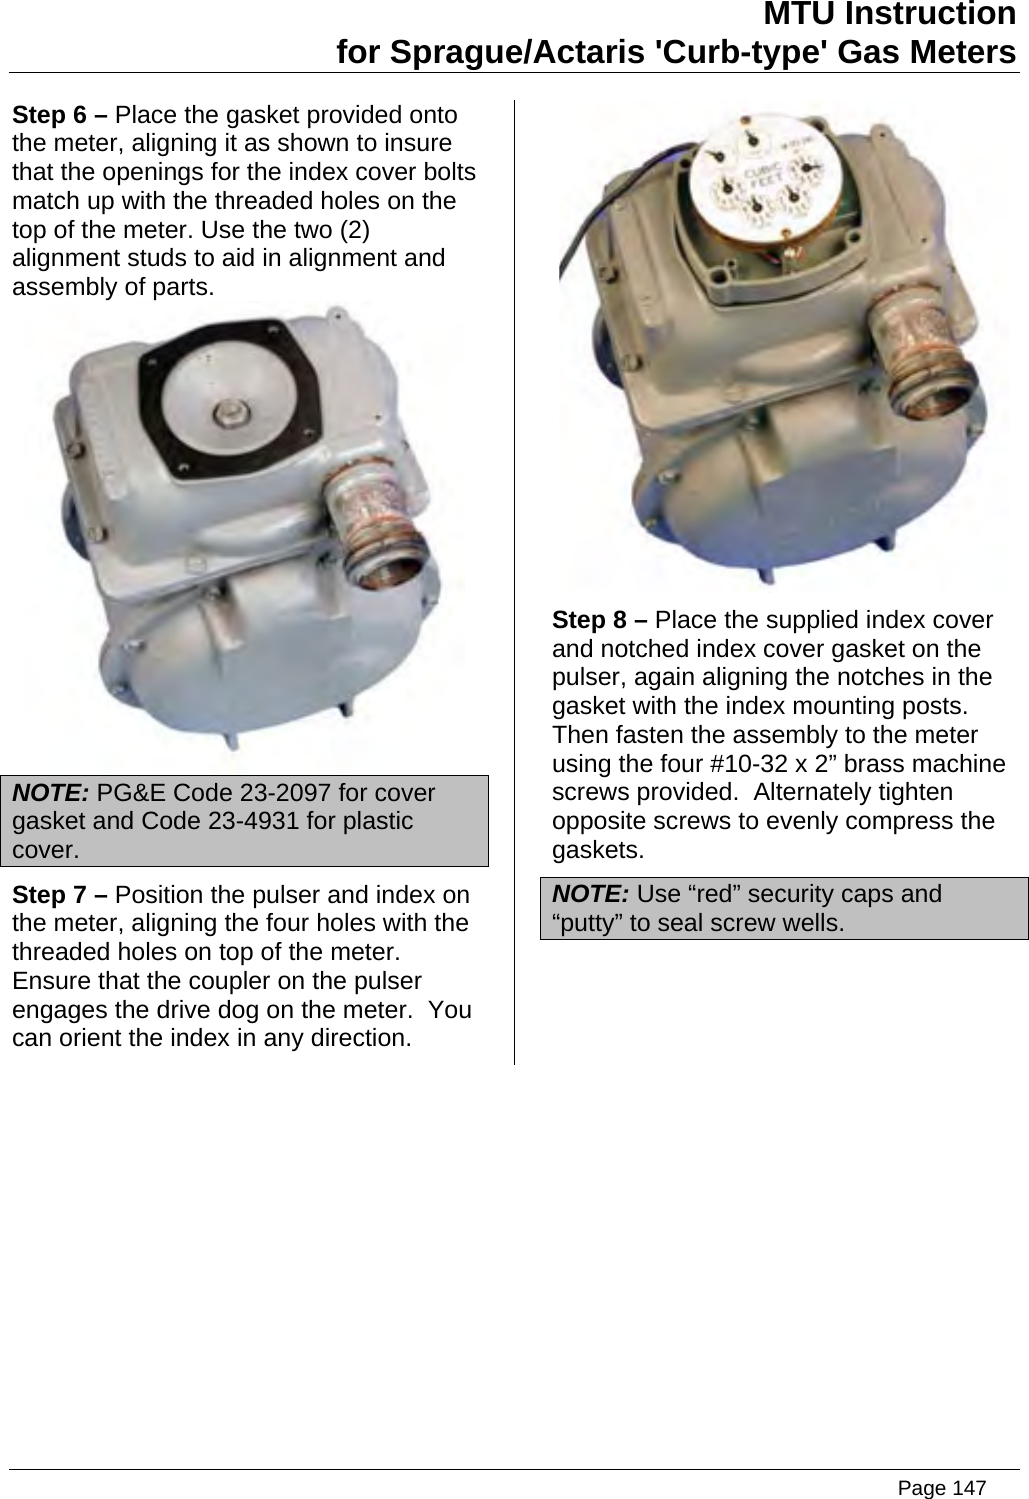 MTU Instruction for Sprague/Actaris &apos;Curb-type&apos; Gas Meters Step 6 – Place the gasket provided onto the meter, aligning it as shown to insure that the openings for the index cover bolts match up with the threaded holes on the top of the meter. Use the two (2) alignment studs to aid in alignment and assembly of parts.  NOTE: PG&amp;E Code 23-2097 for cover gasket and Code 23-4931 for plastic cover. Step 7 – Position the pulser and index on the meter, aligning the four holes with the threaded holes on top of the meter.  Ensure that the coupler on the pulser engages the drive dog on the meter.  You can orient the index in any direction.  Step 8 – Place the supplied index cover and notched index cover gasket on the pulser, again aligning the notches in the gasket with the index mounting posts.   Then fasten the assembly to the meter using the four #10-32 x 2” brass machine screws provided.  Alternately tighten opposite screws to evenly compress the gaskets.  NOTE: Use “red” security caps and “putty” to seal screw wells.    Page 147